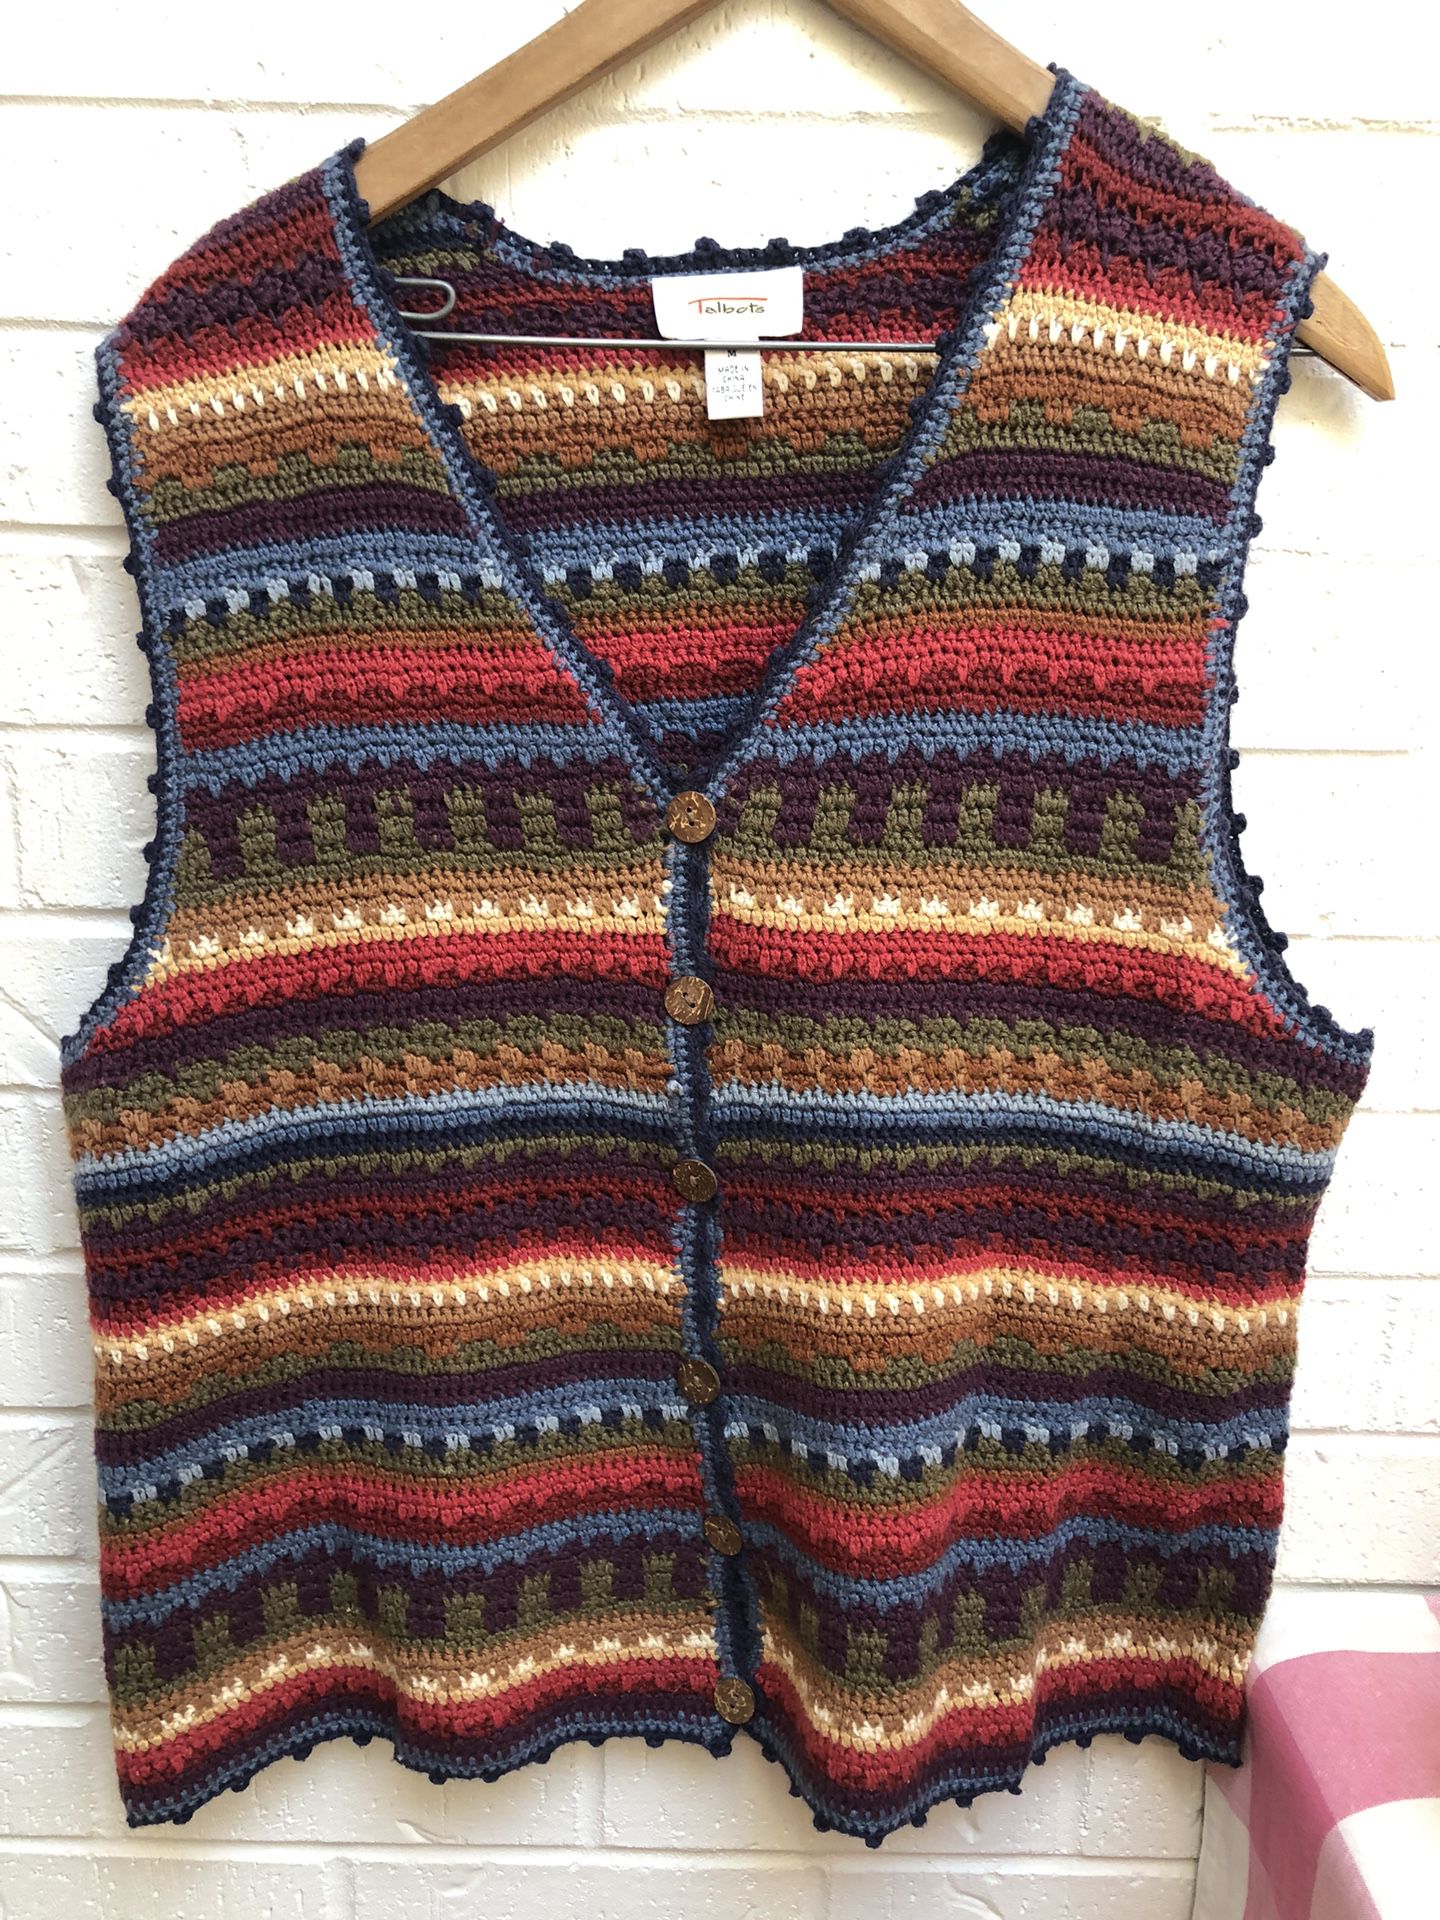 Talbots Women’s Preowned Multi Colored Cotton Rami Sweater Vest Size Med